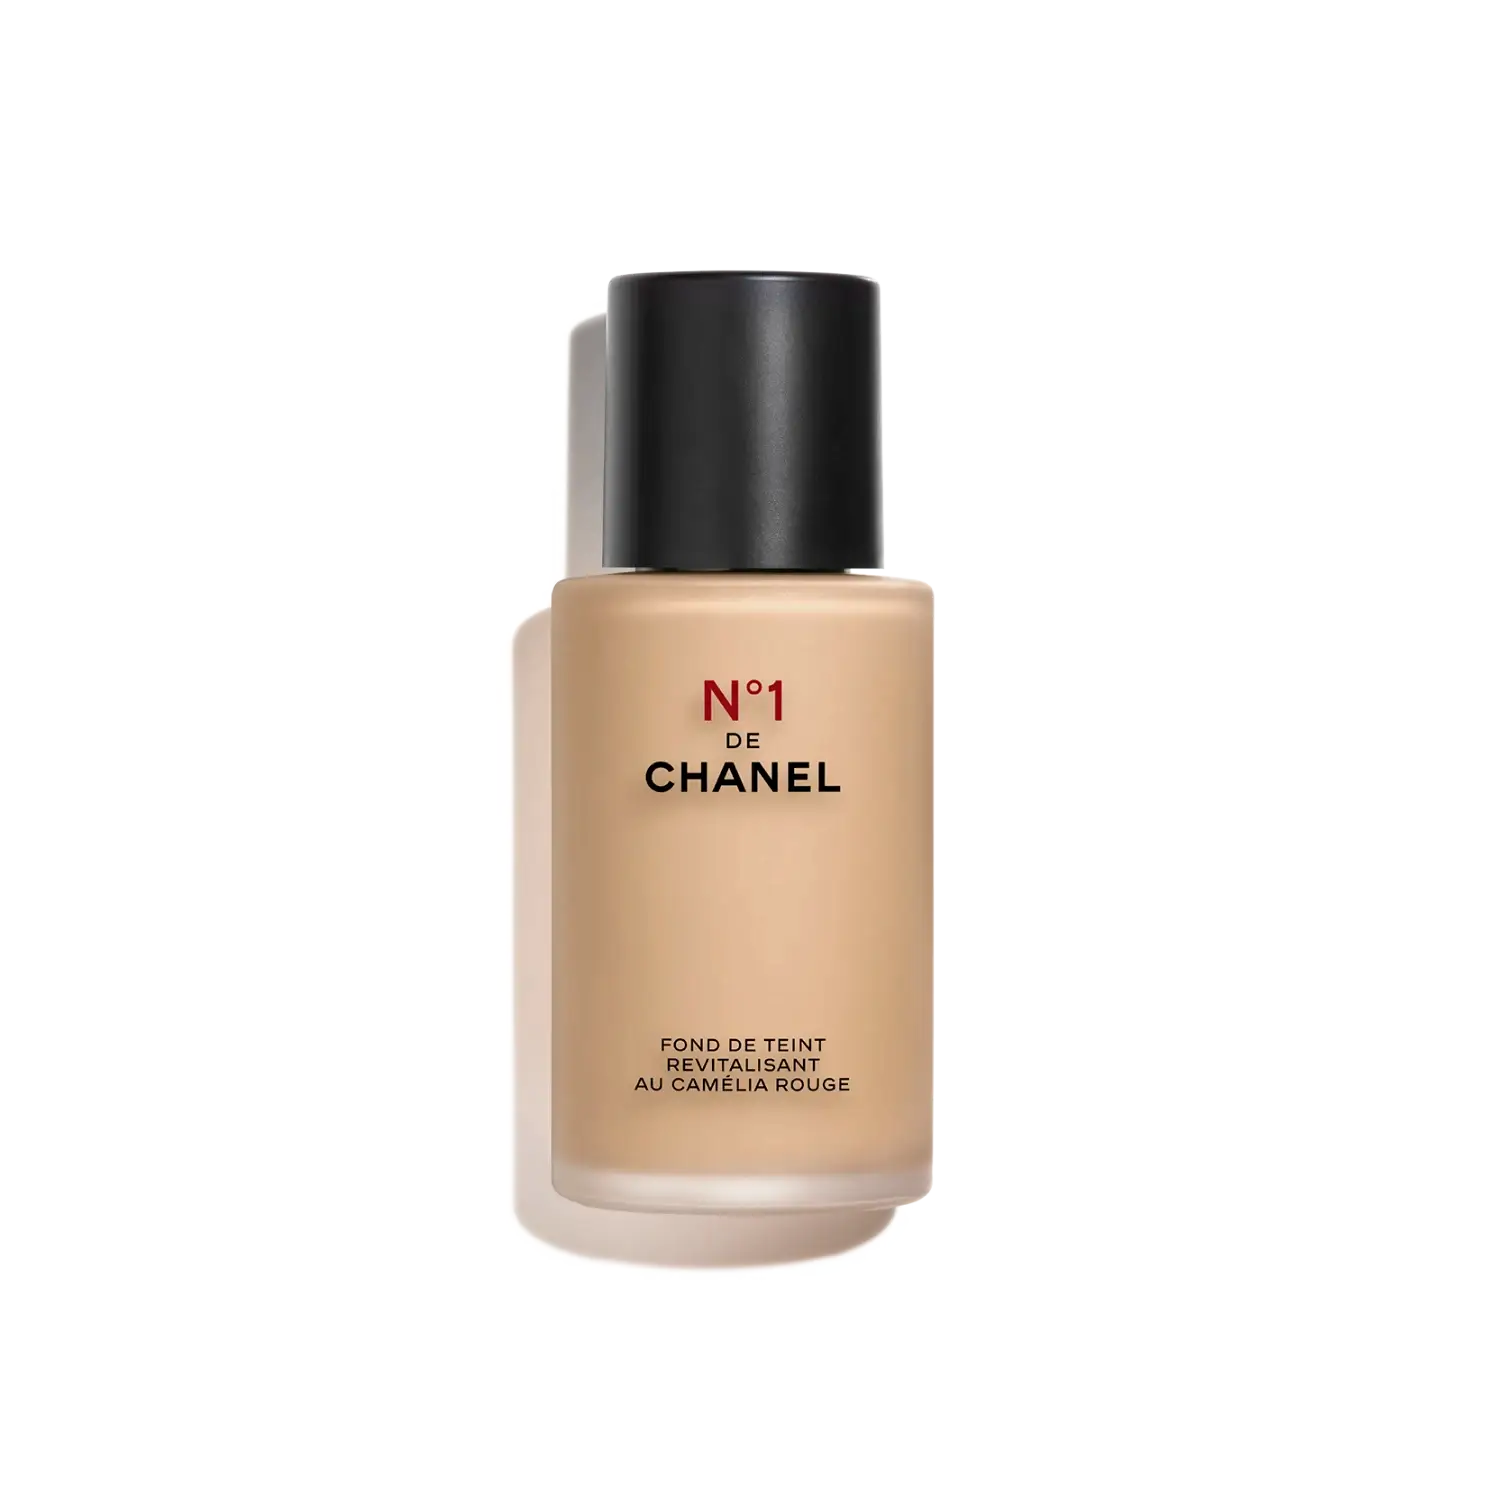 N°1 DE CHANEL REVITALIZING FOUNDATION in the shade B50